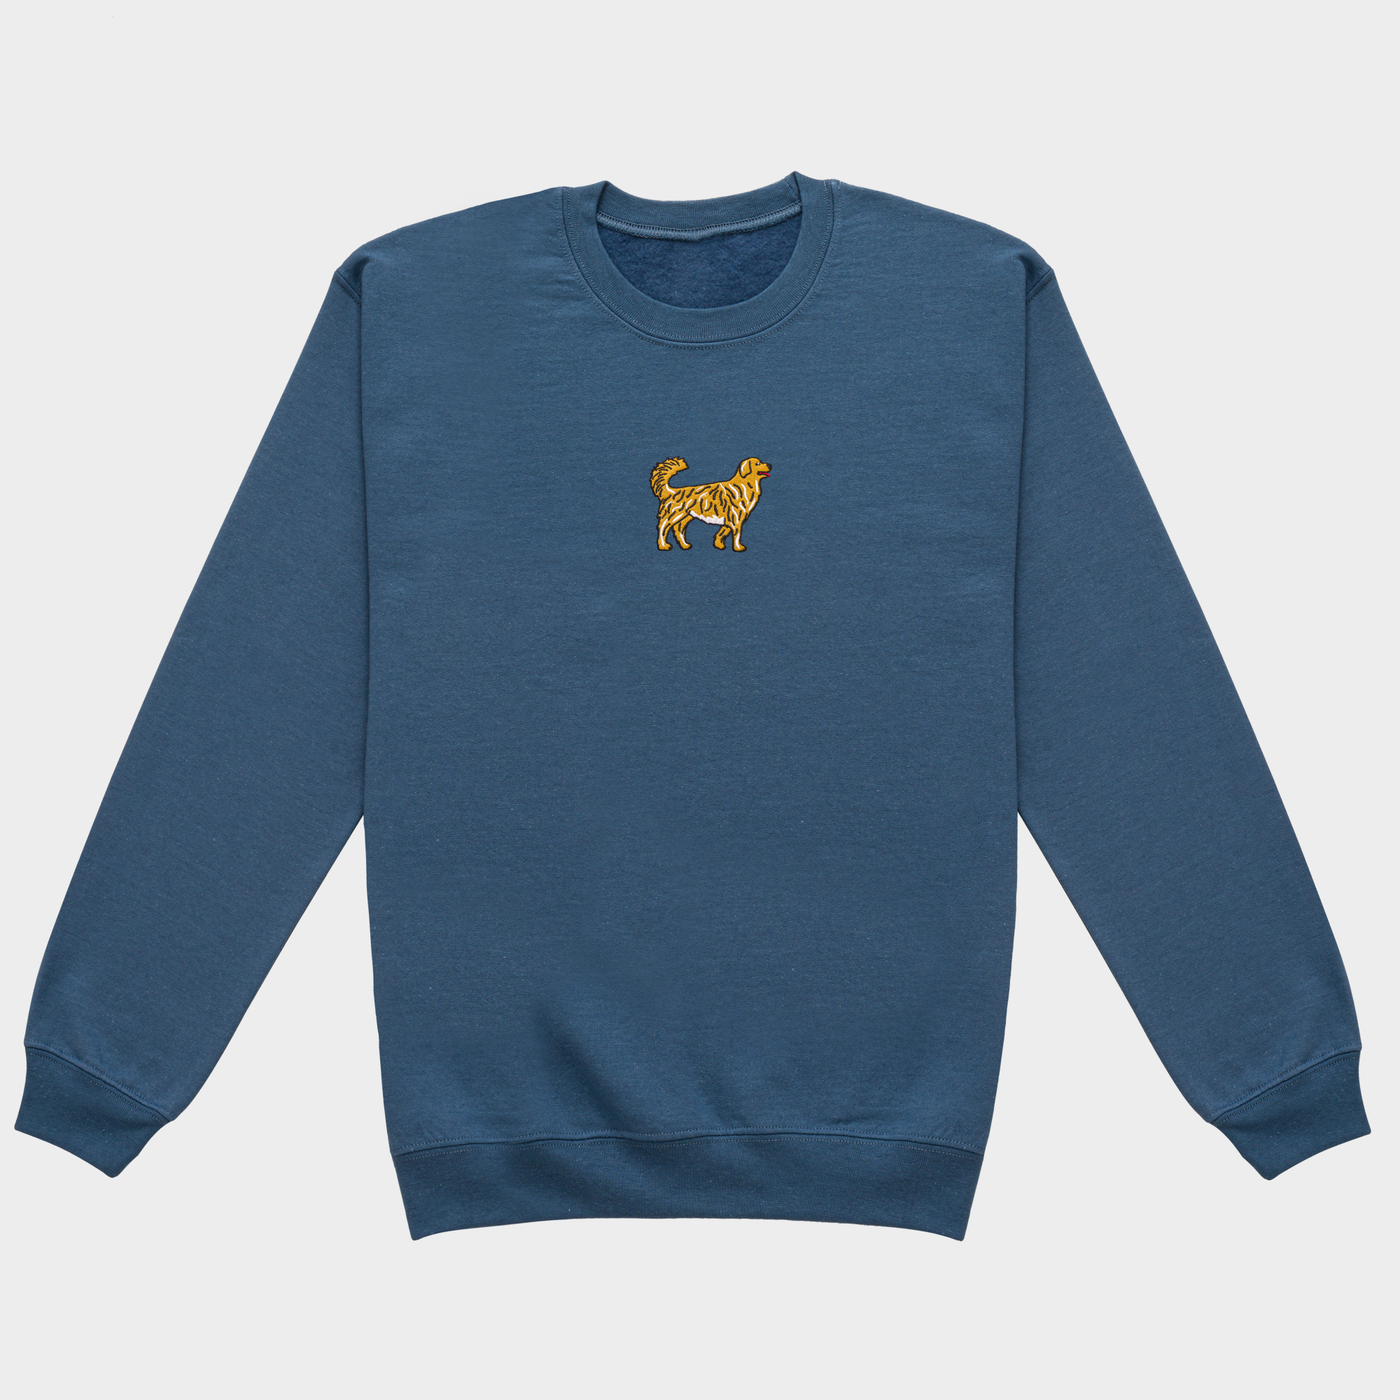 Bobby's Planet Men's Embroidered Golden Retriever Sweatshirt from Paws Dog Cat Animals Collection in Indigo Blue Color#color_indigo-blue